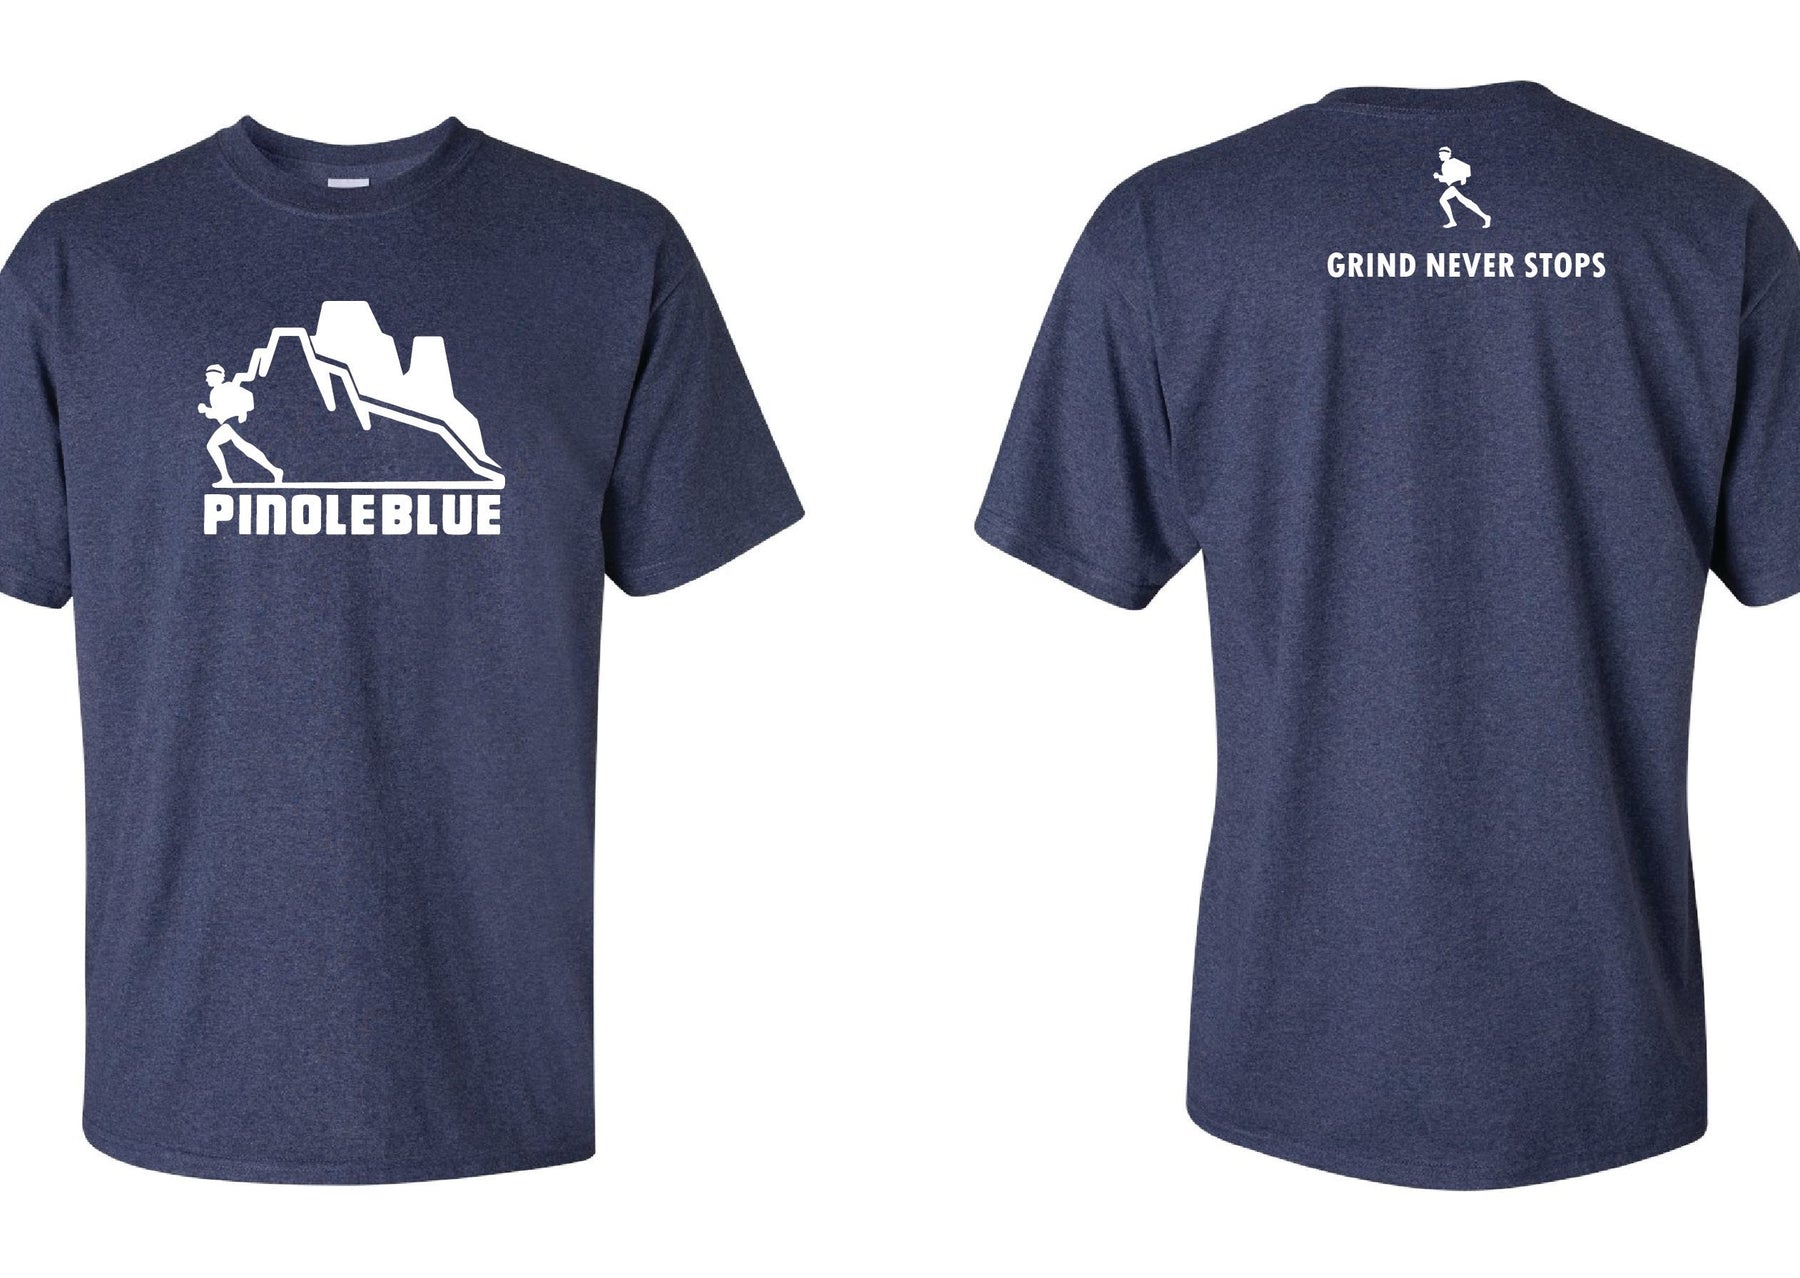 Front and back of a heathered blue t-shirt. The front has a Pinole Blue logo and the back has the text Grind Never Stops underneath a running man.